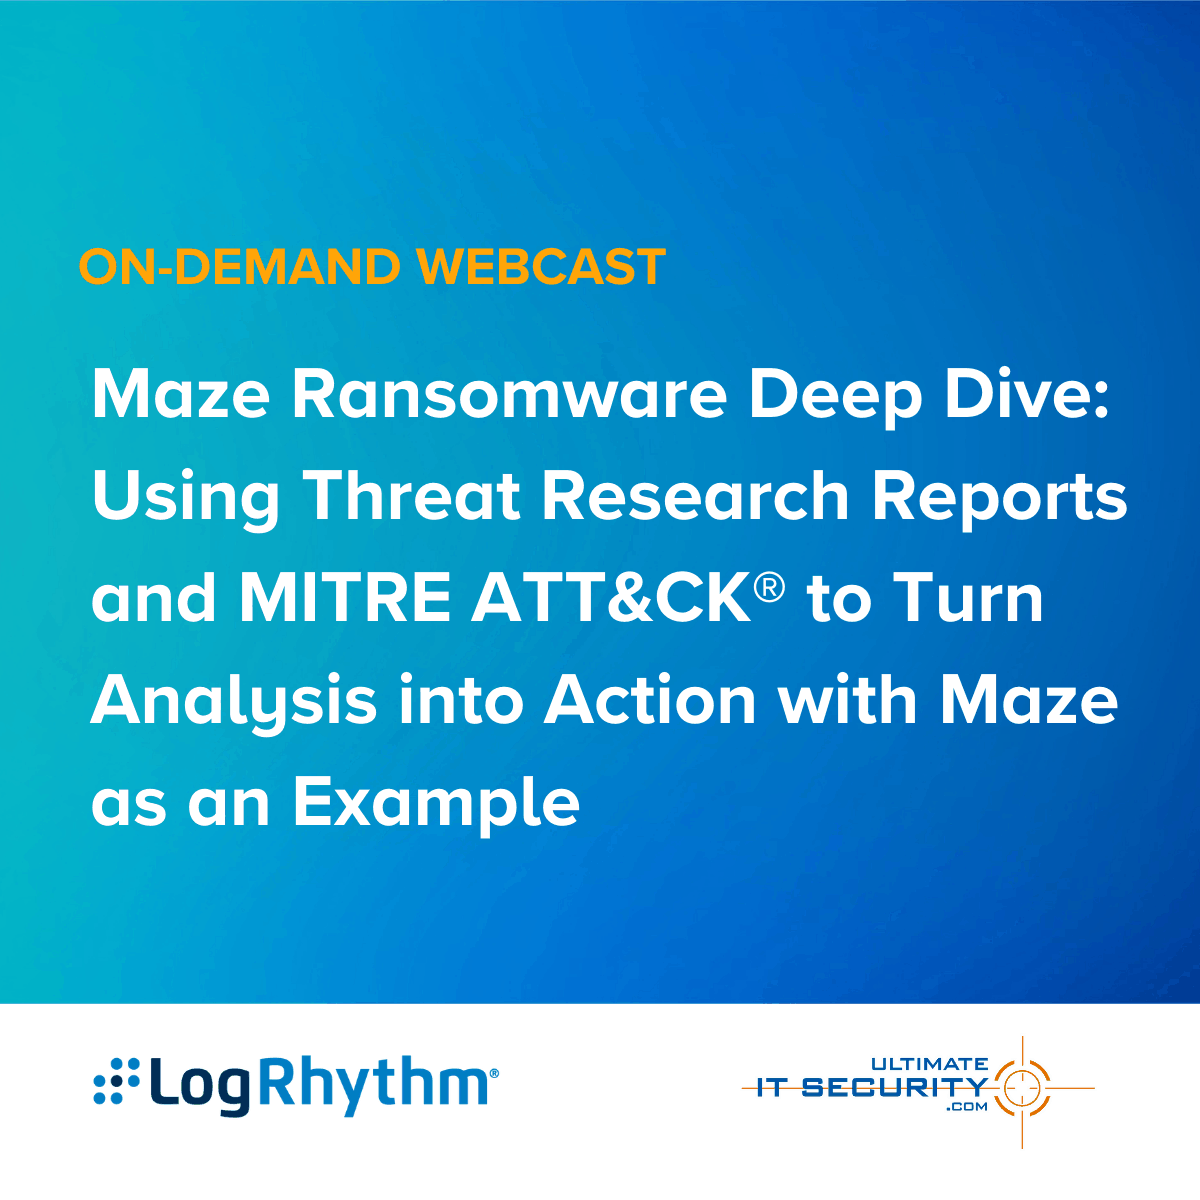 Maze Ransomware Deep Dive: Using Threat Research Reports and MITRE ATT&CK to Turn Analysis into Action with Maze as an Example